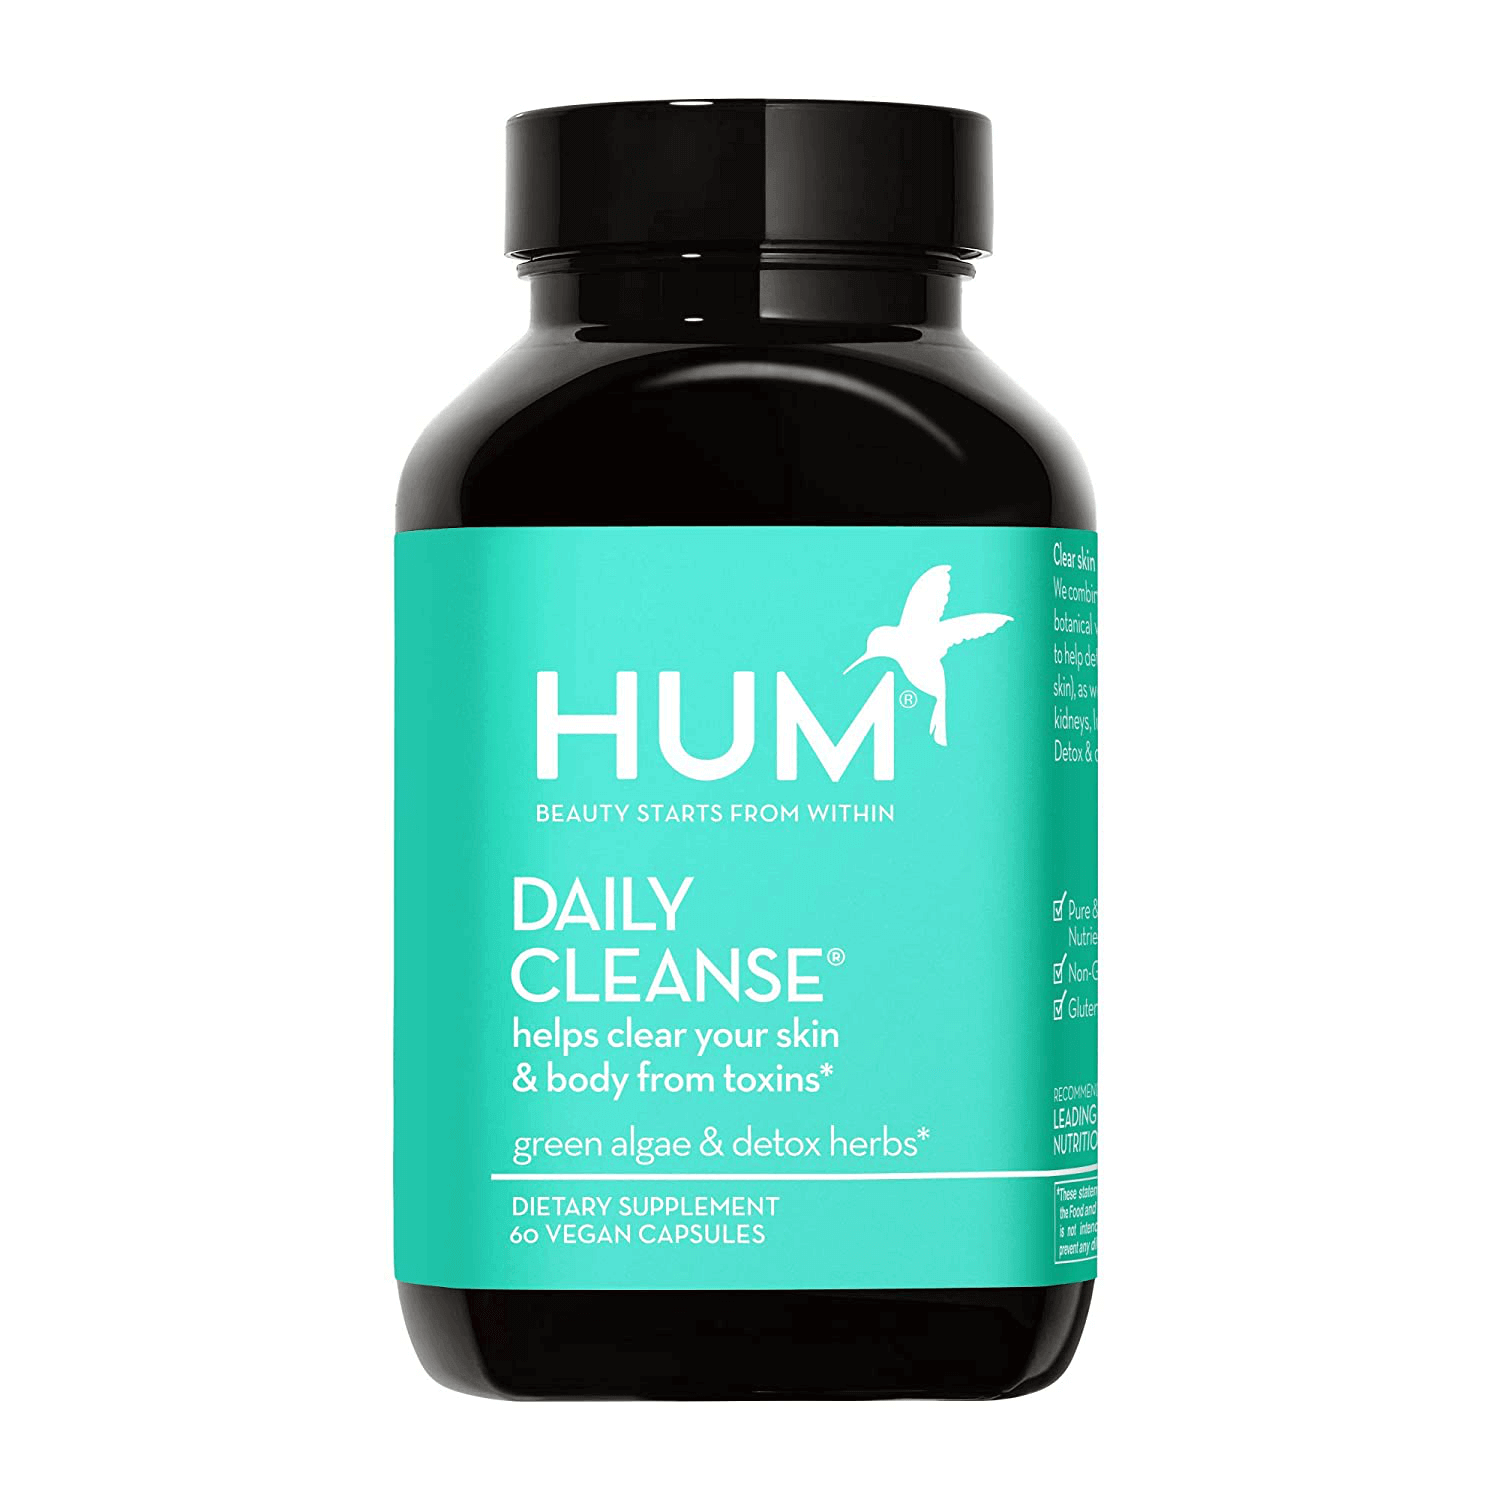 HUM Daily Cleanse Skin Supplement - Clear Skin with Organic Algae, 14 Herbs, Vitamins & Minerals to Soothe and Balance Skin, Supports Improved Digestion (60 Vegan Capsules) - vitamenstore.com